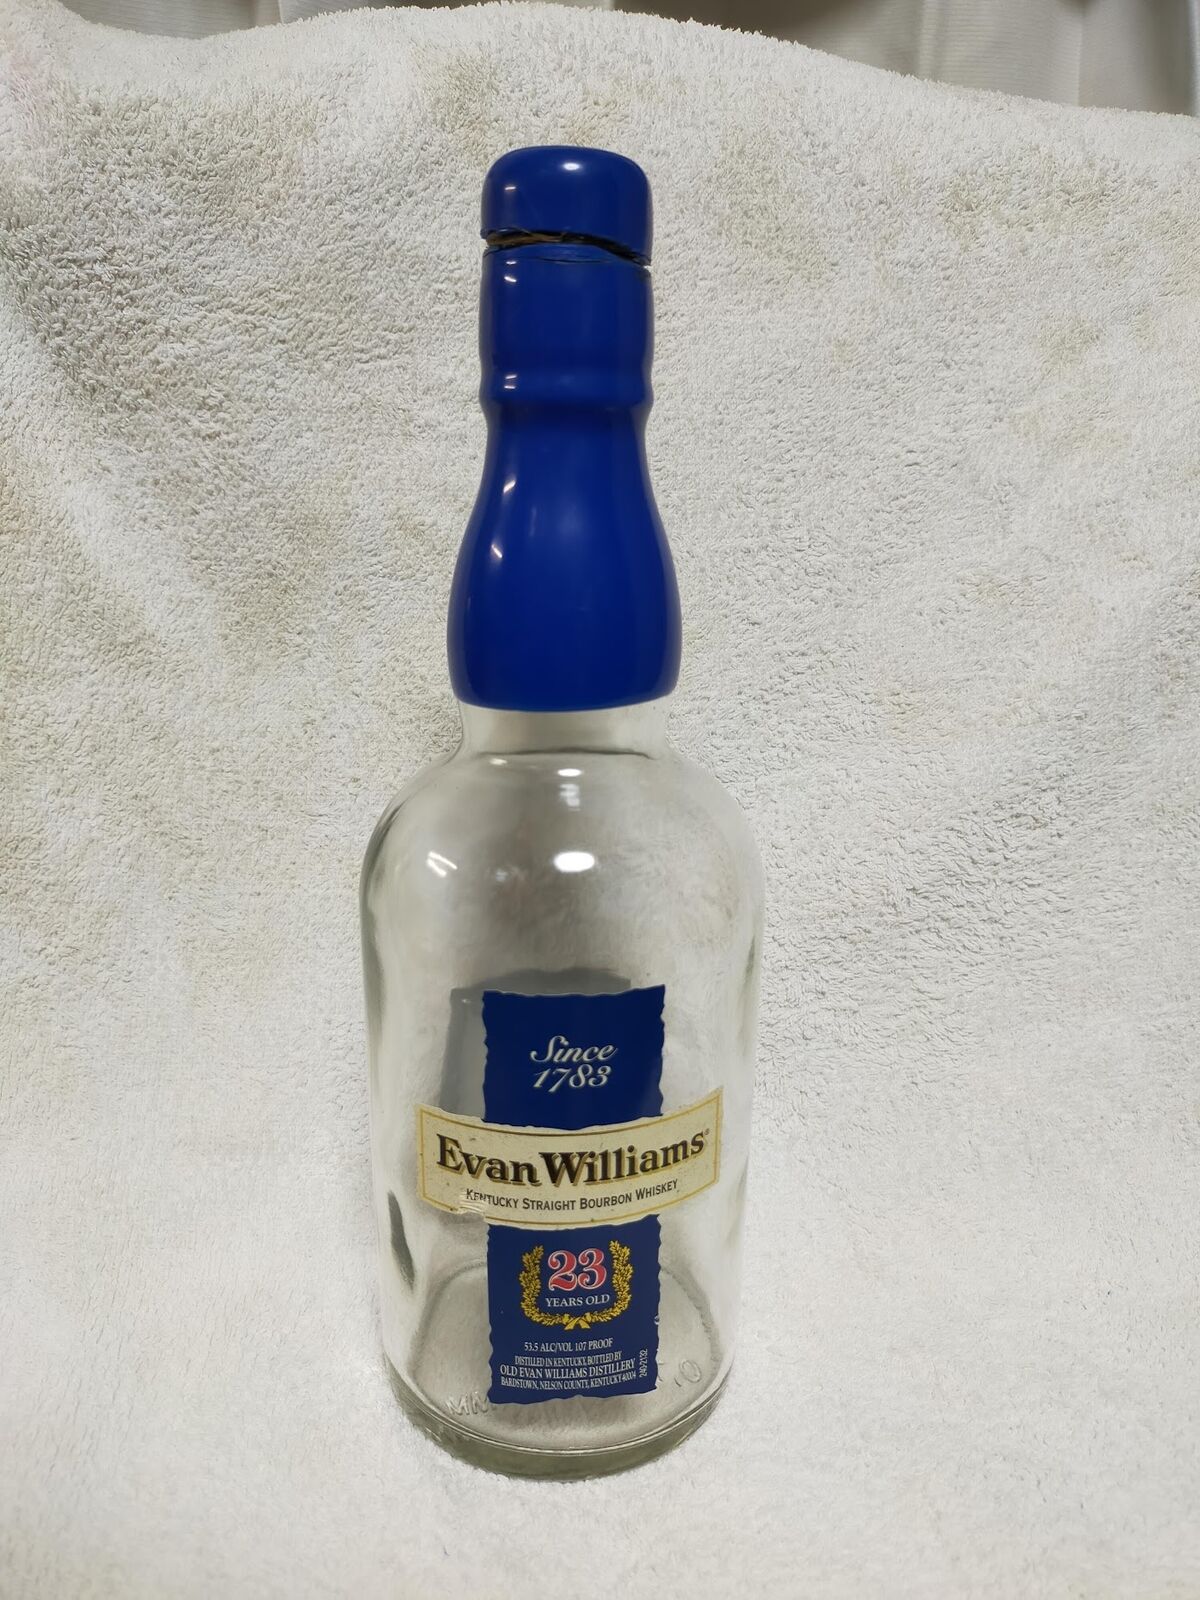 Evan Williams 23 years American Bourbon Whisky bottle (empty)  Japan Limited フタ